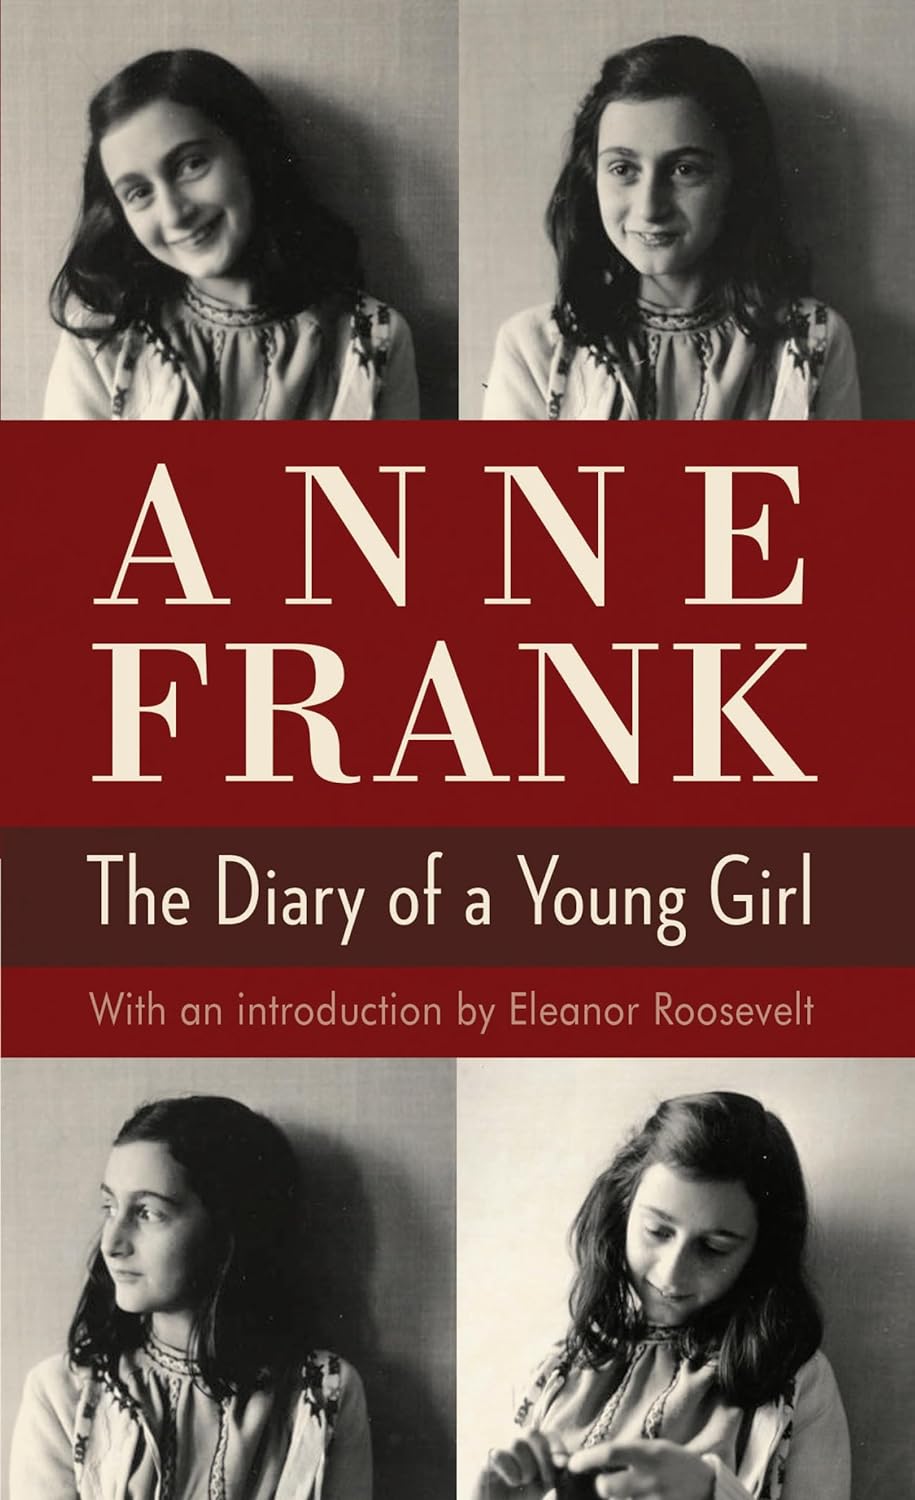 The Diary of a Young Girl by Anne Frank (1947)